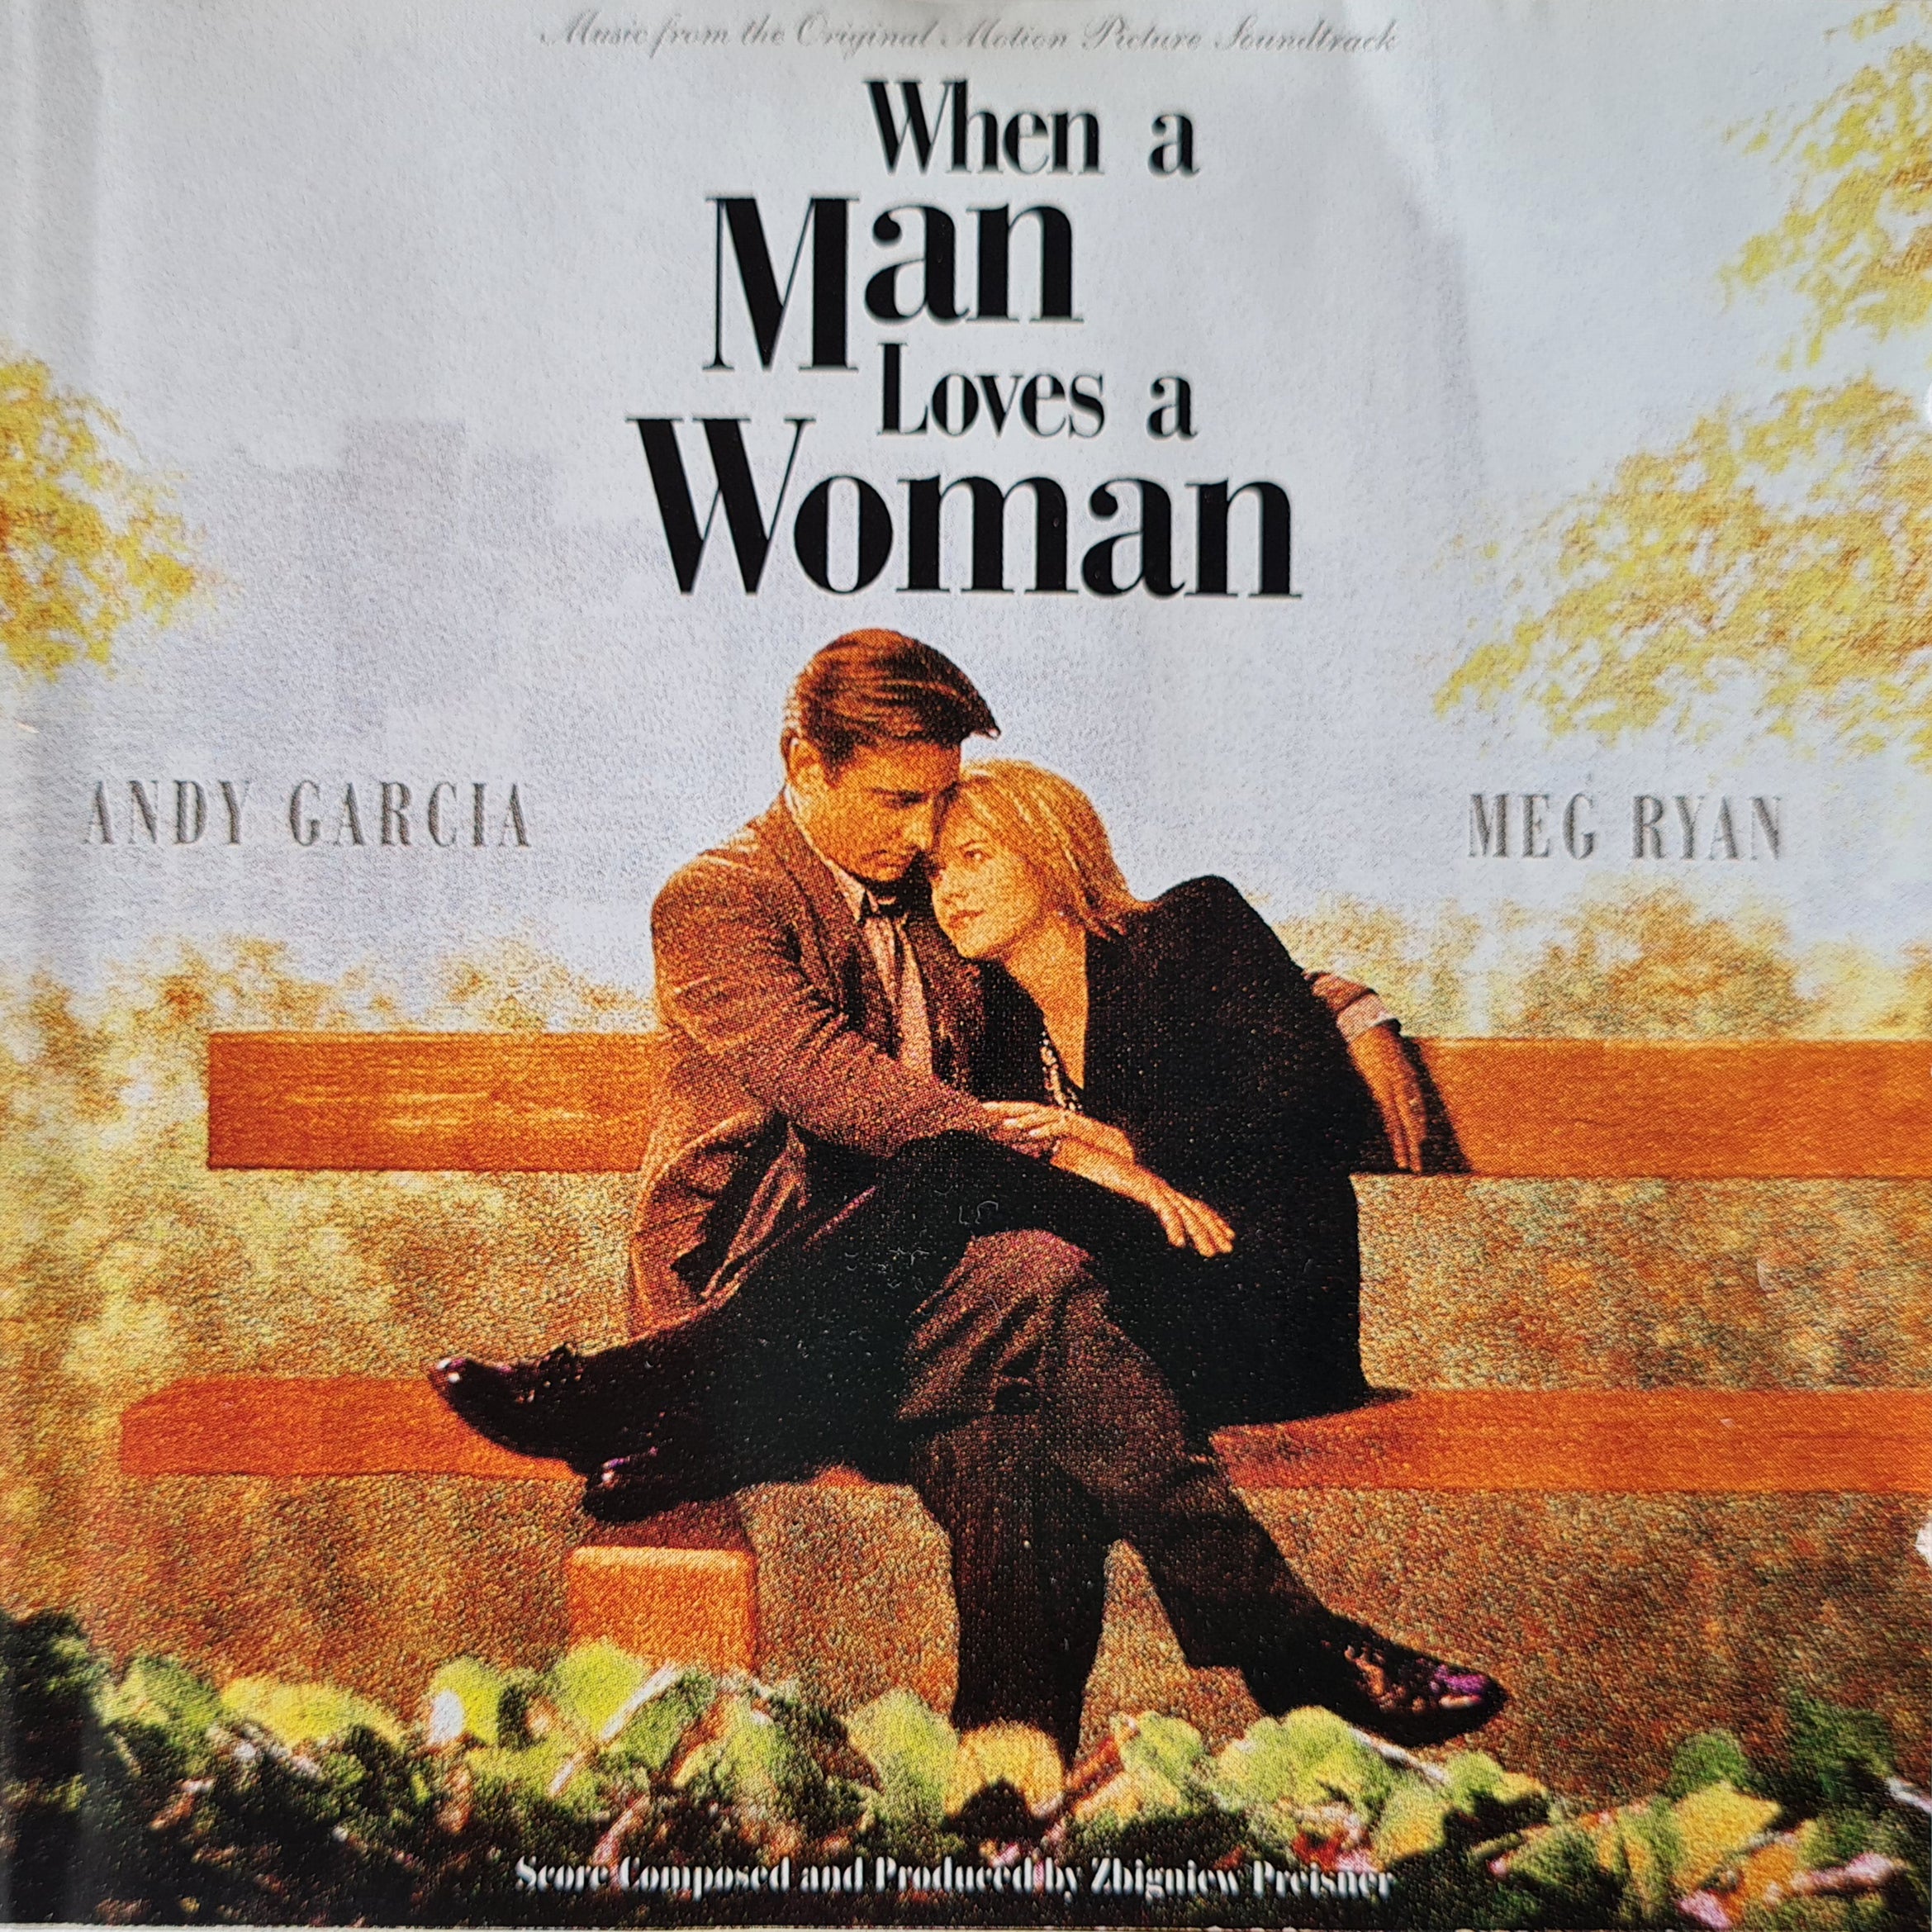 When a Man Loves a Woman - Music from the Original Motion Picture Soundtrack (CD)